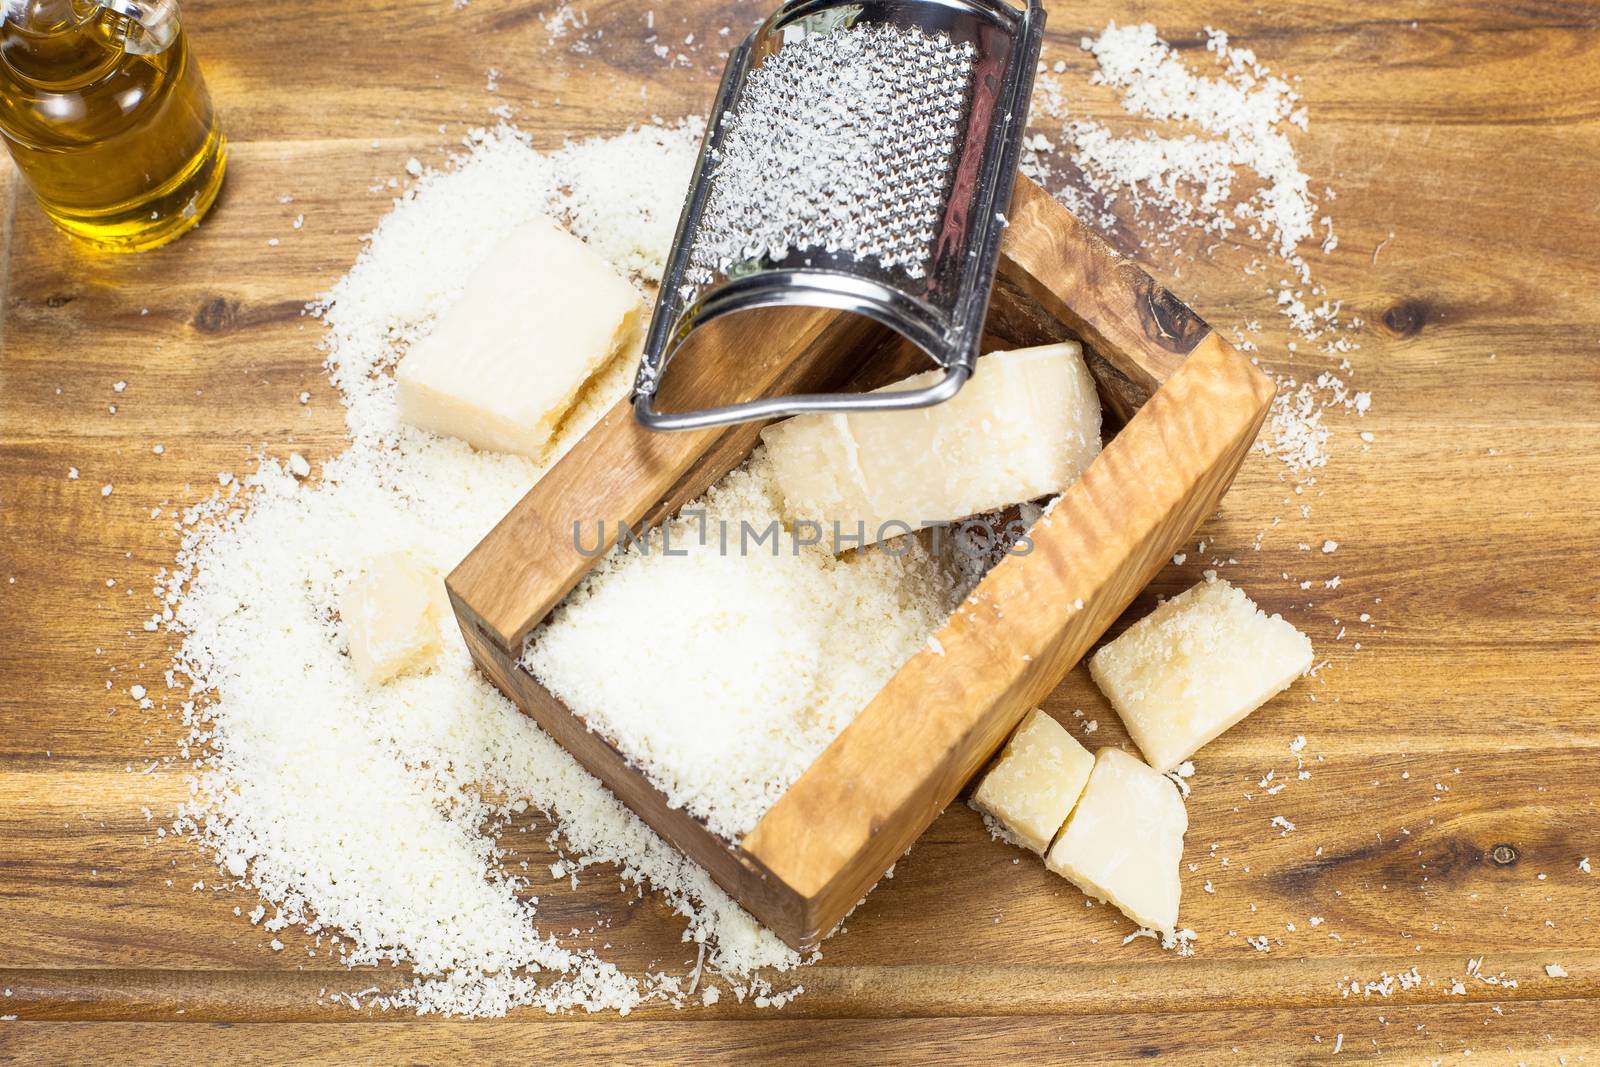 Grated Parmesan cheese by Slast20